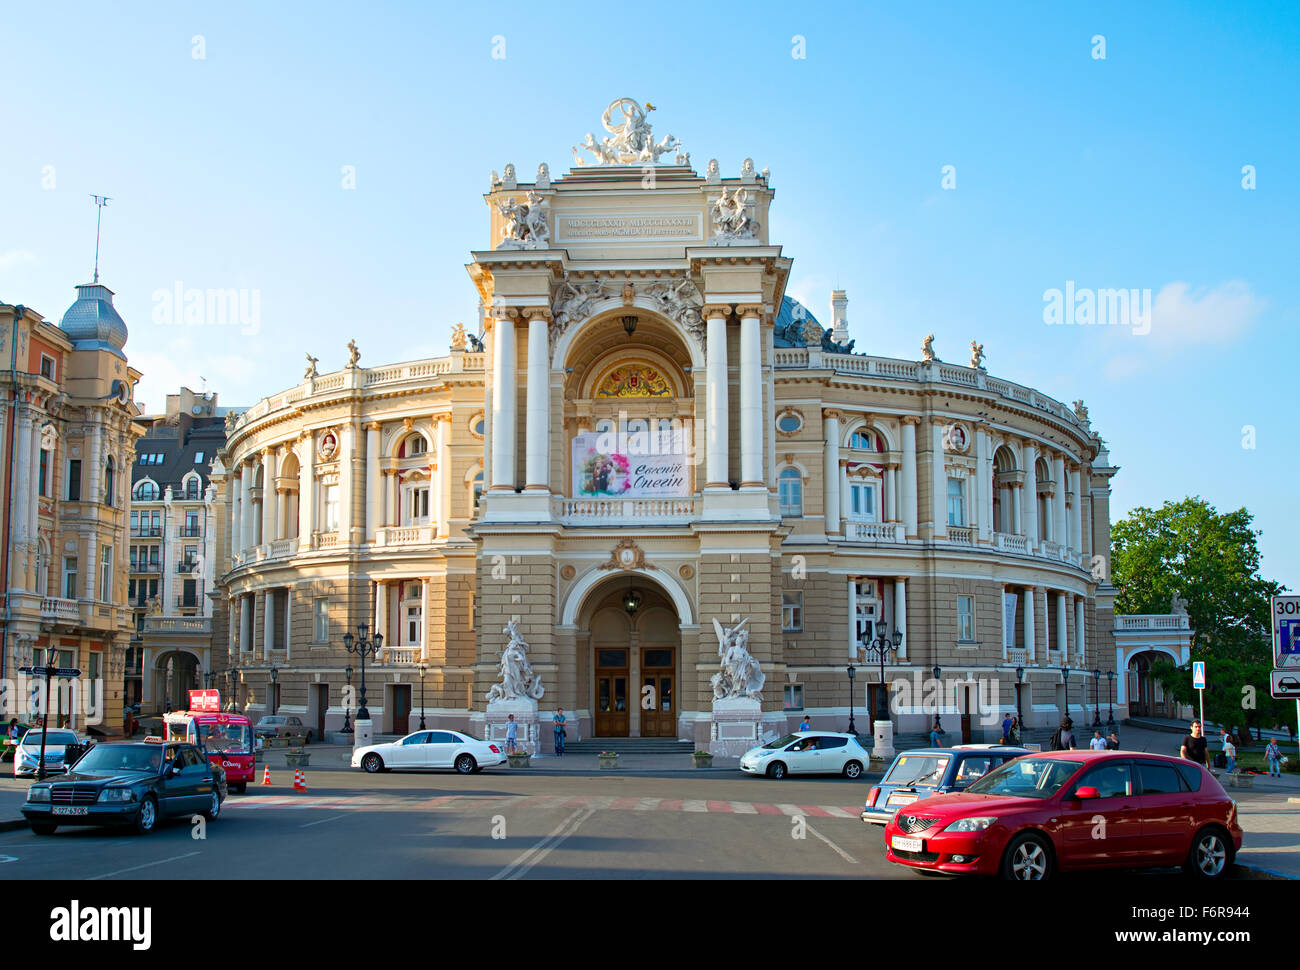 The Odessa National Academic Theater of Opera and Ballet is the oldest theater in Odessa, Ukraine Stock Photo